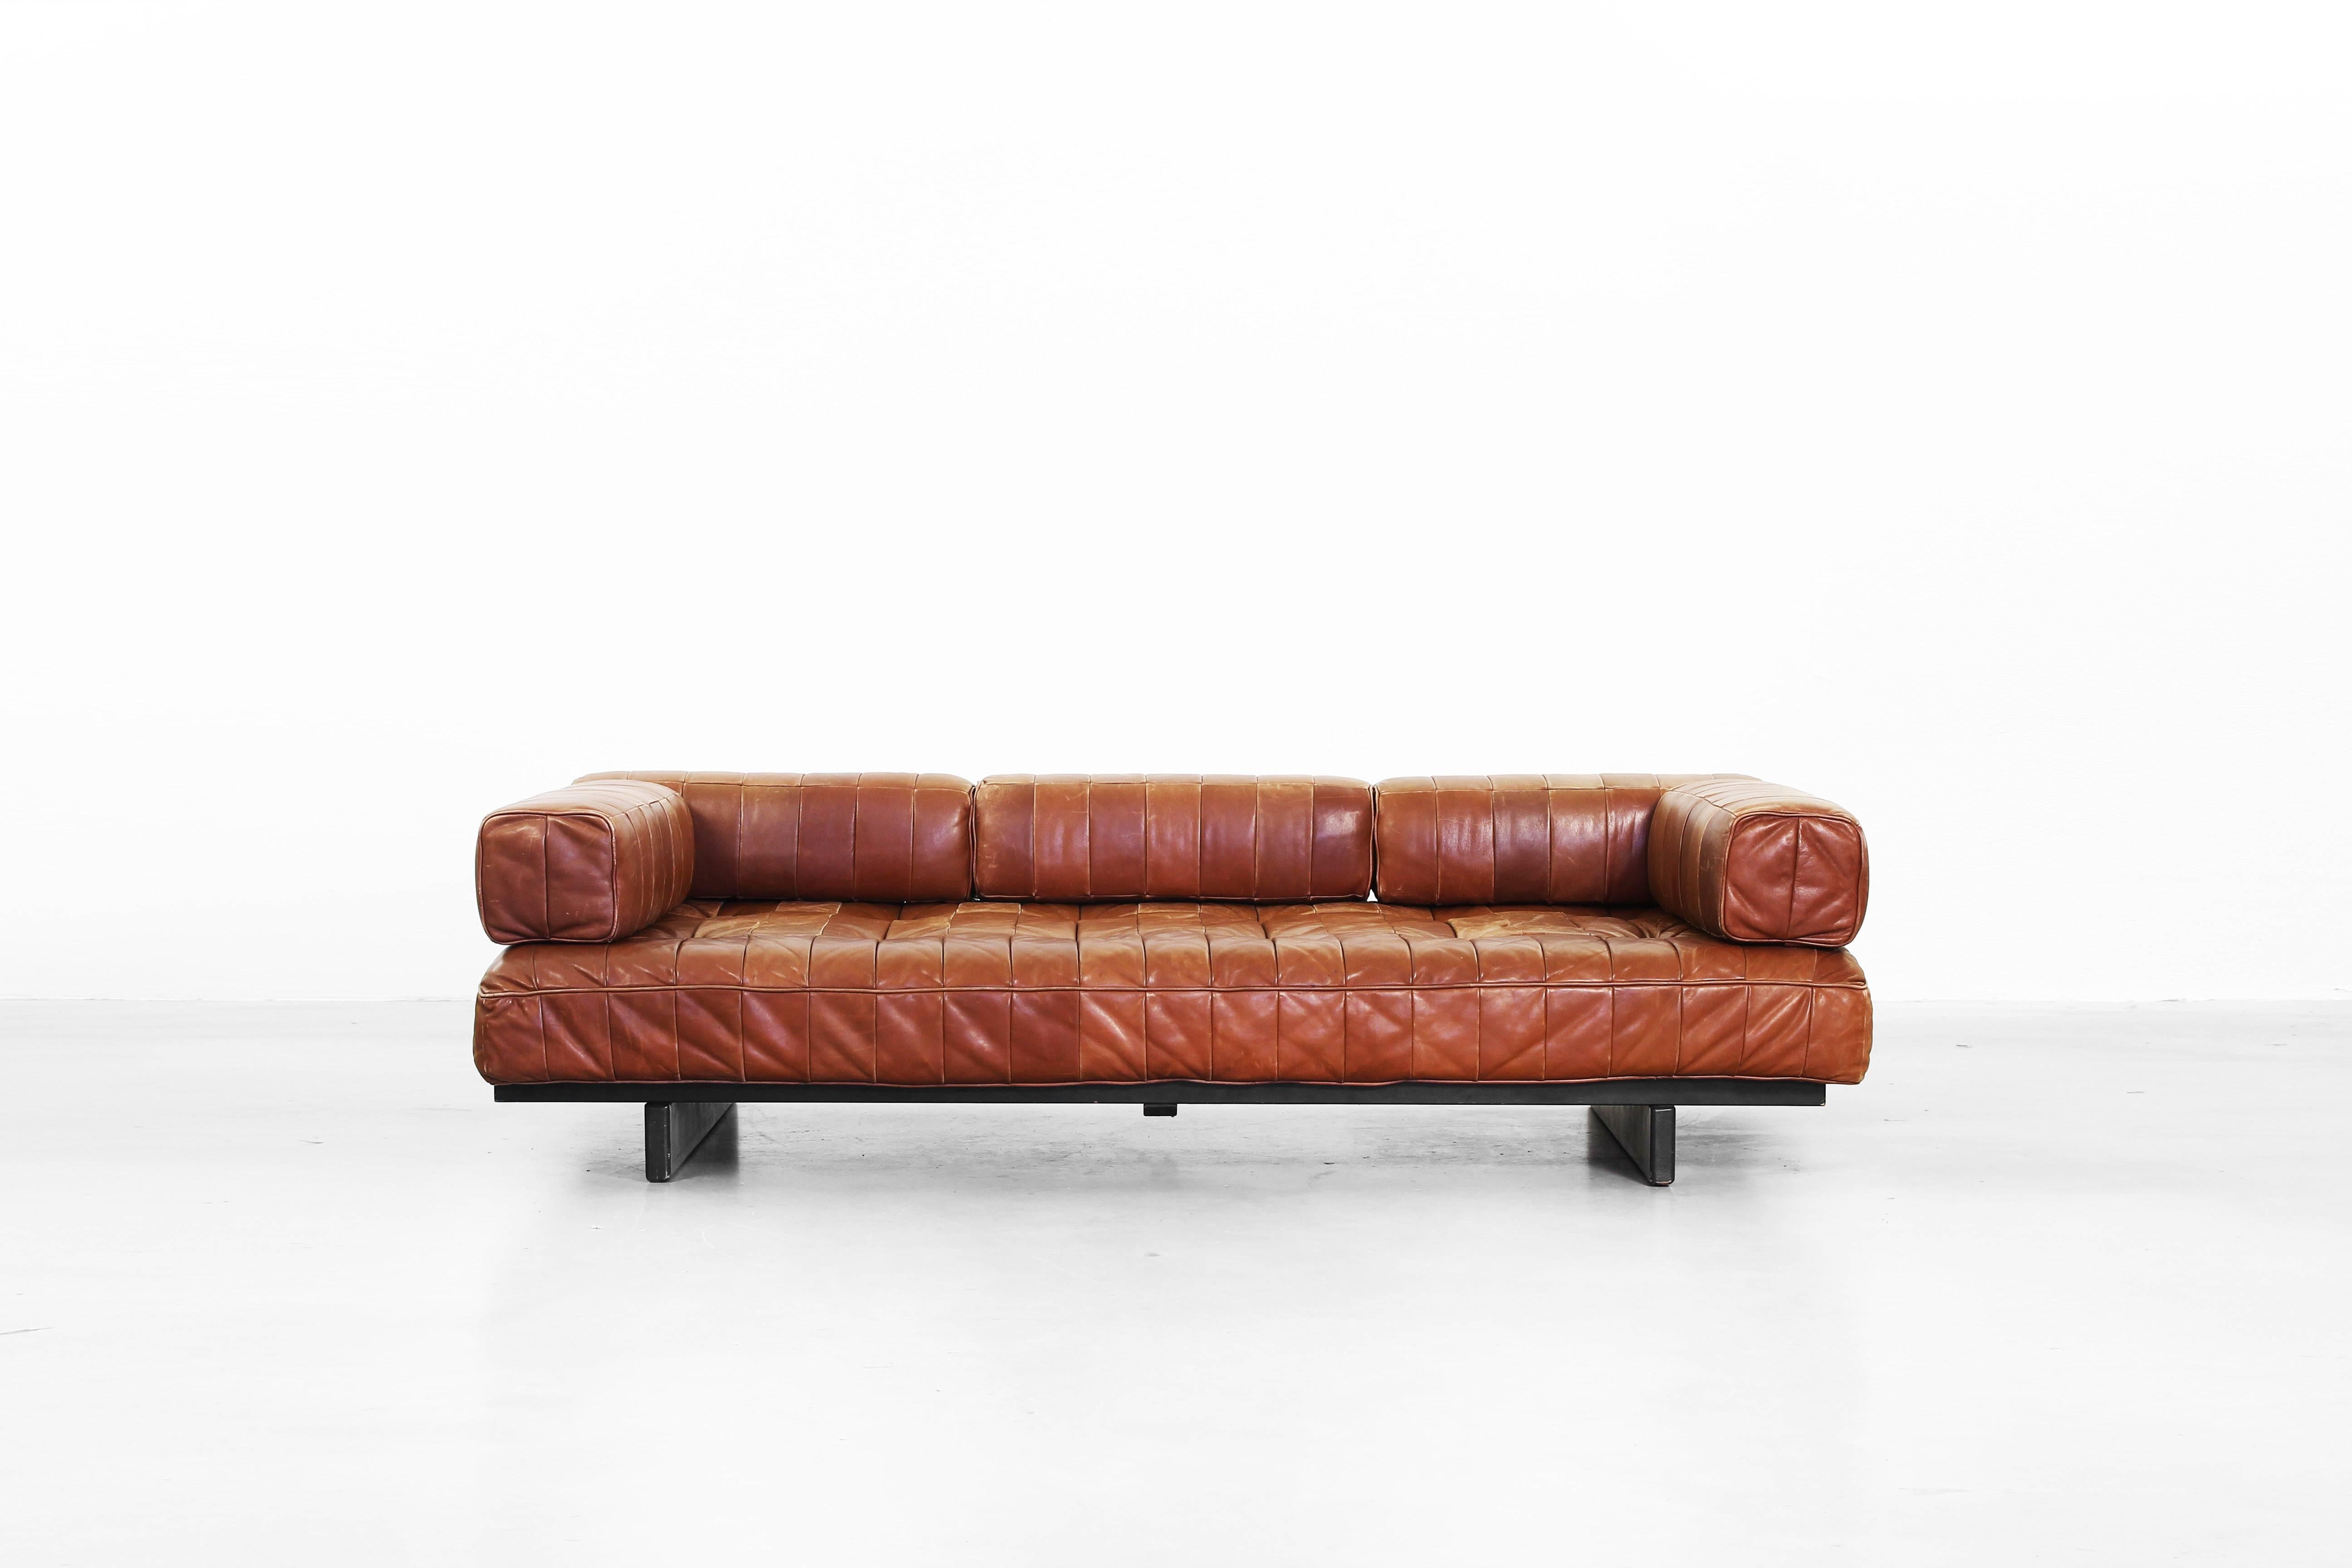 Very beautiful daybed manufactured by De Sede in Switzerland in the 1970s.
The daybed comes with five cushions and a gorgeous patinated brown-cognac leather. It is in a very good original condition without any damages or repairs.